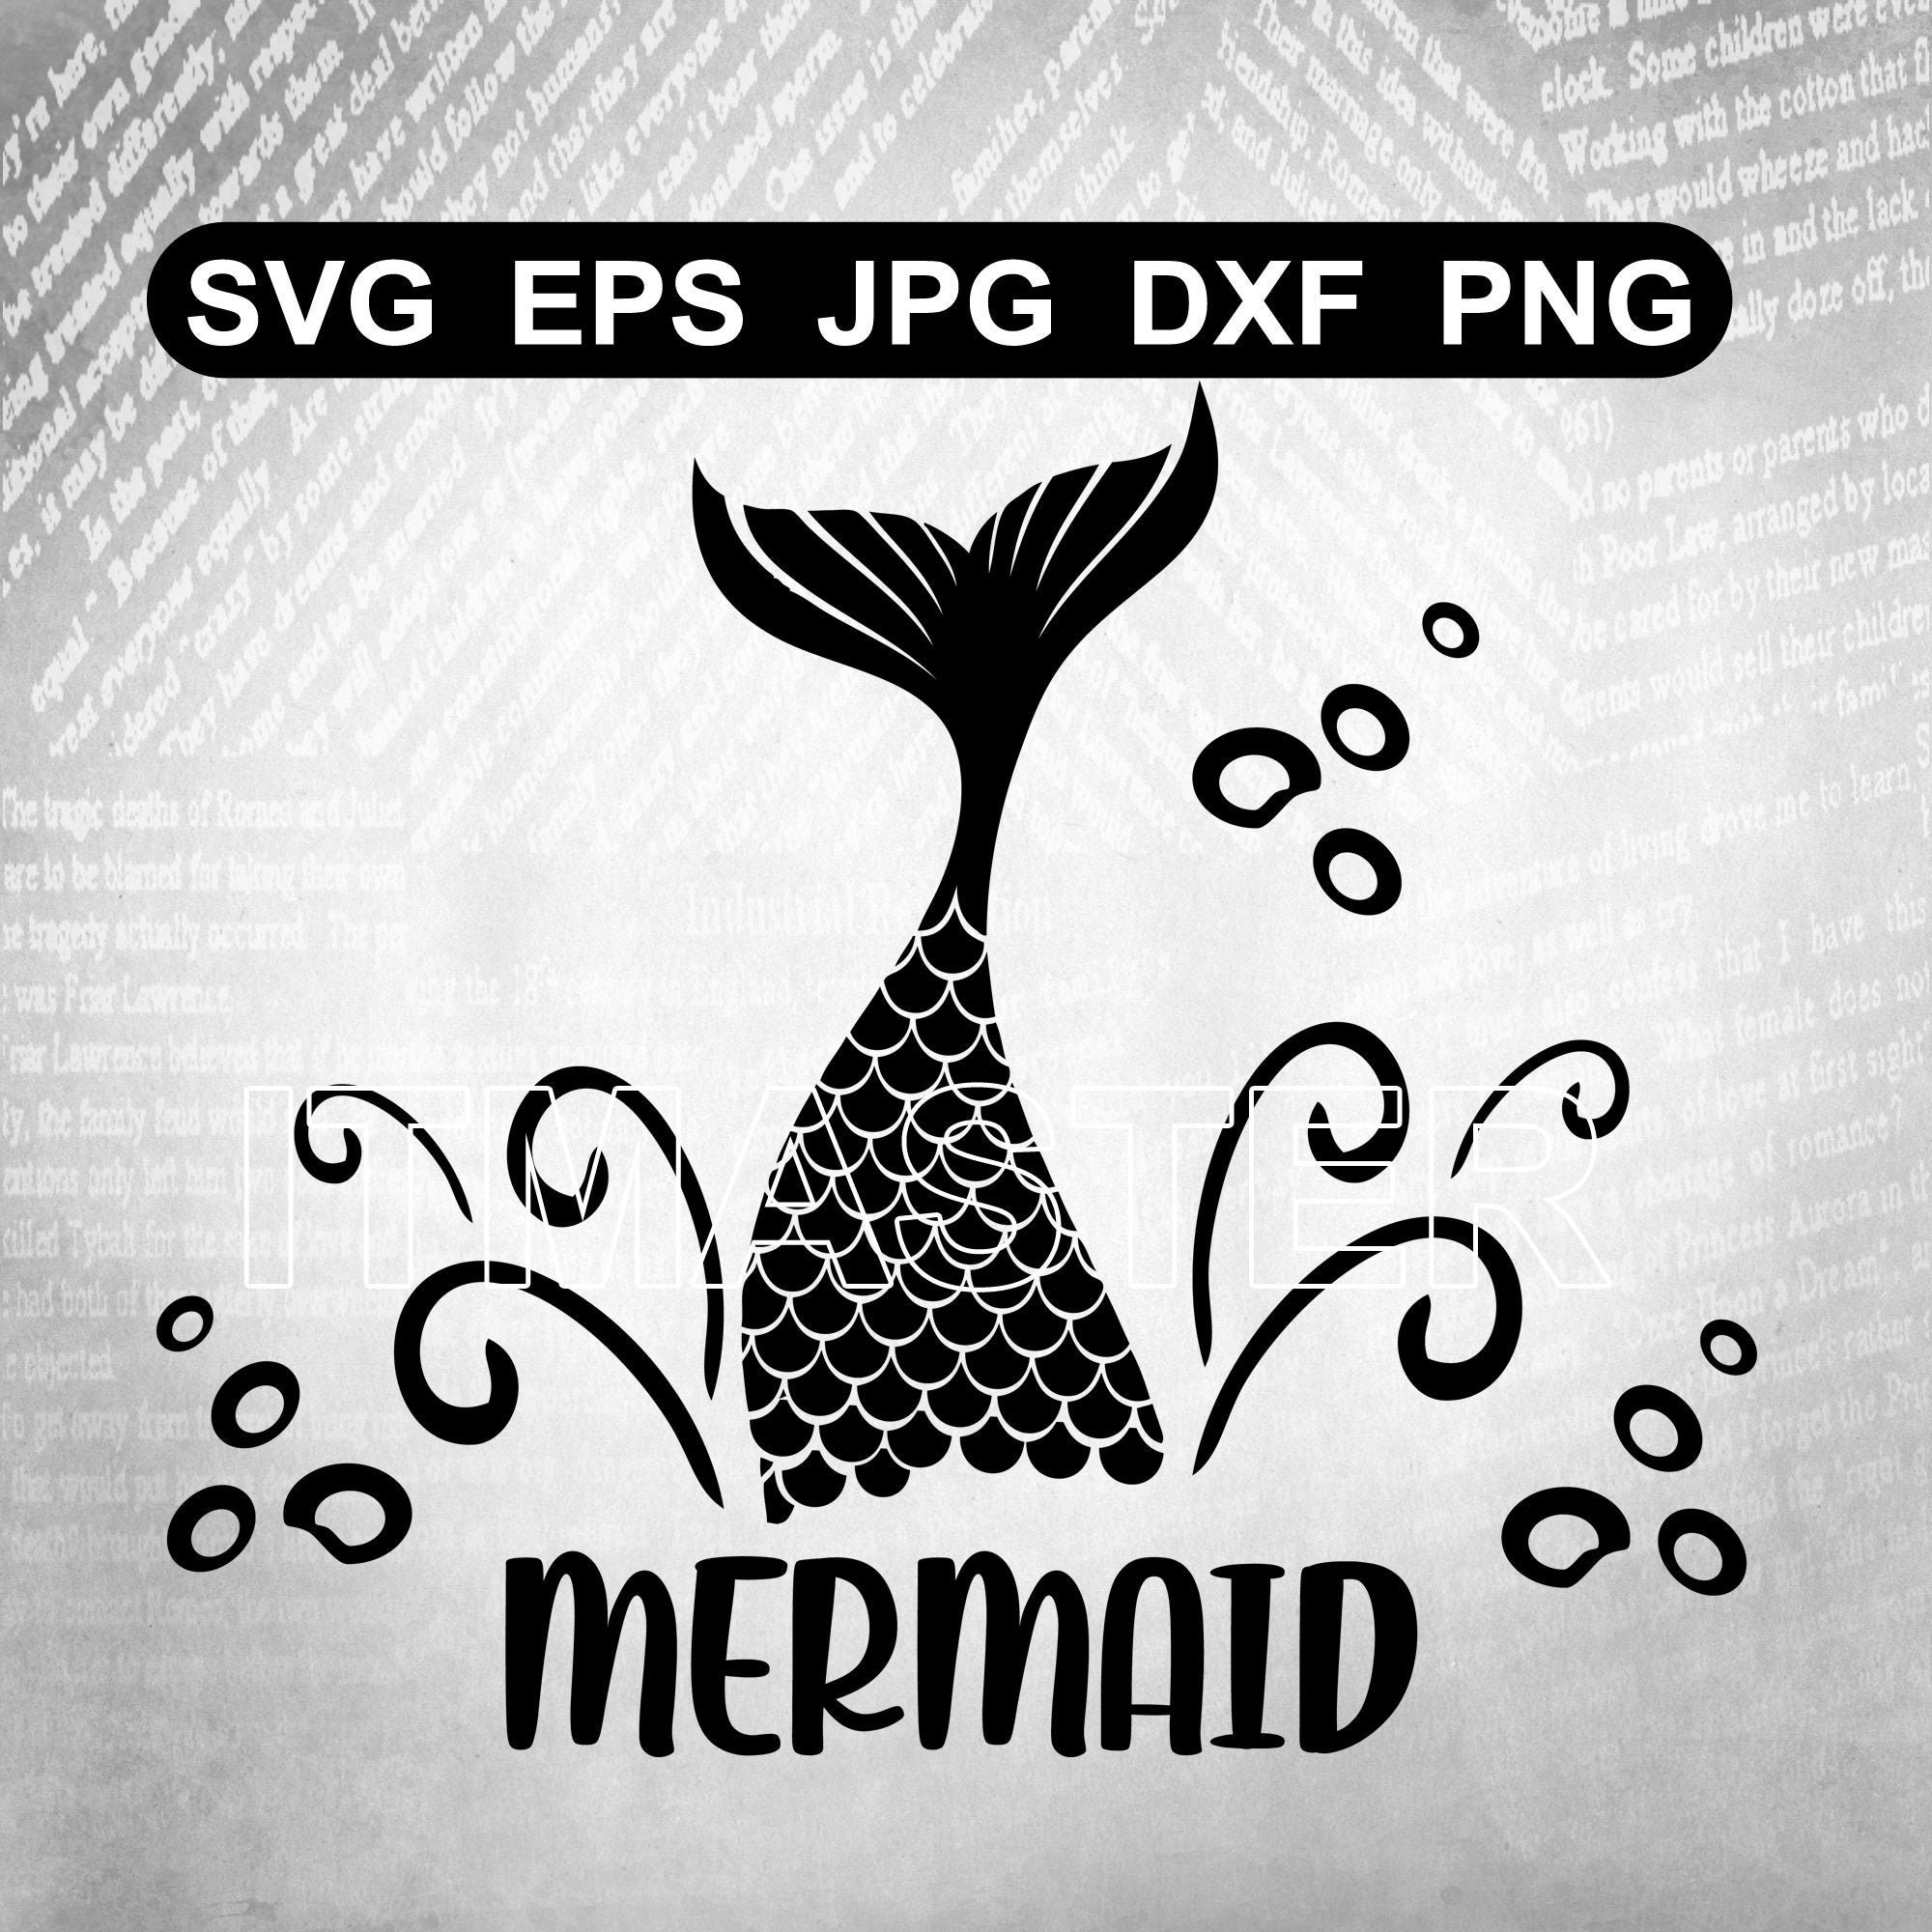 Mermaid Tail With Text Svg Dxf Jpg Png Eps Cut File - Etsy